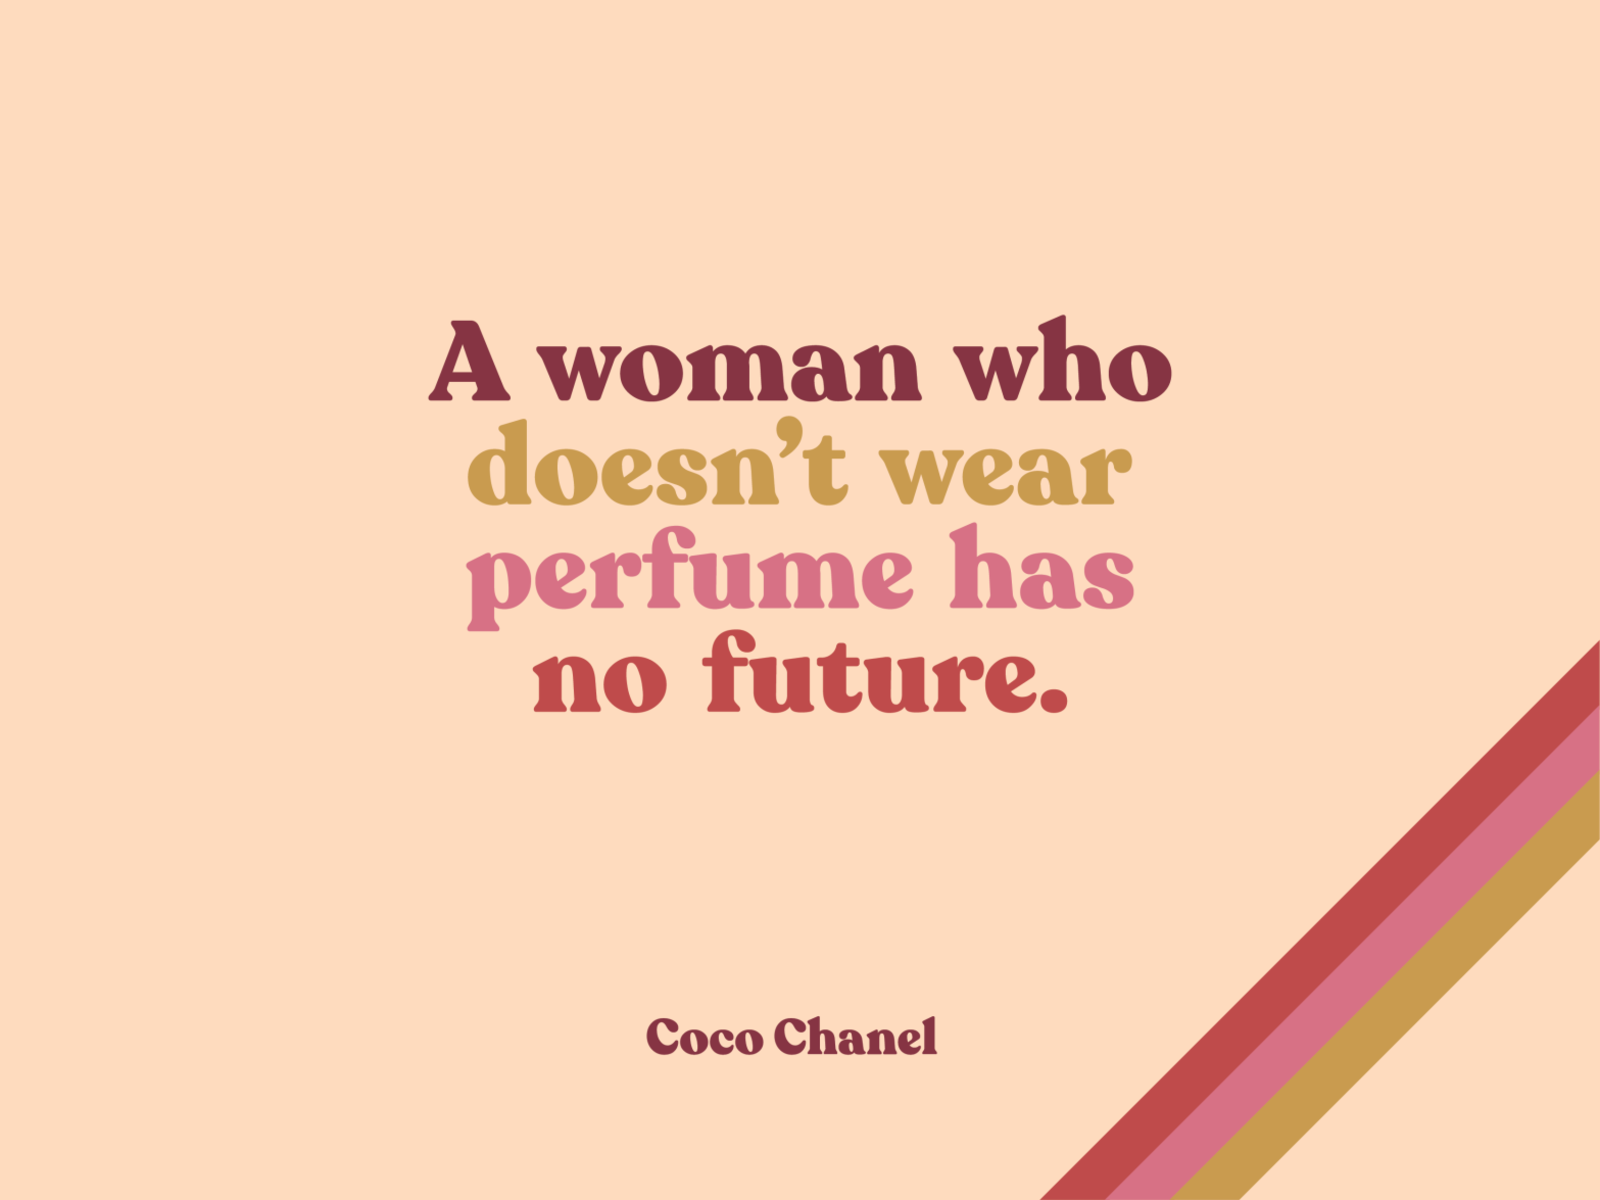 Coco Chanel Quotes On Best Perfume QuotesGram  Perfume Chanel perfume  Coco chanel